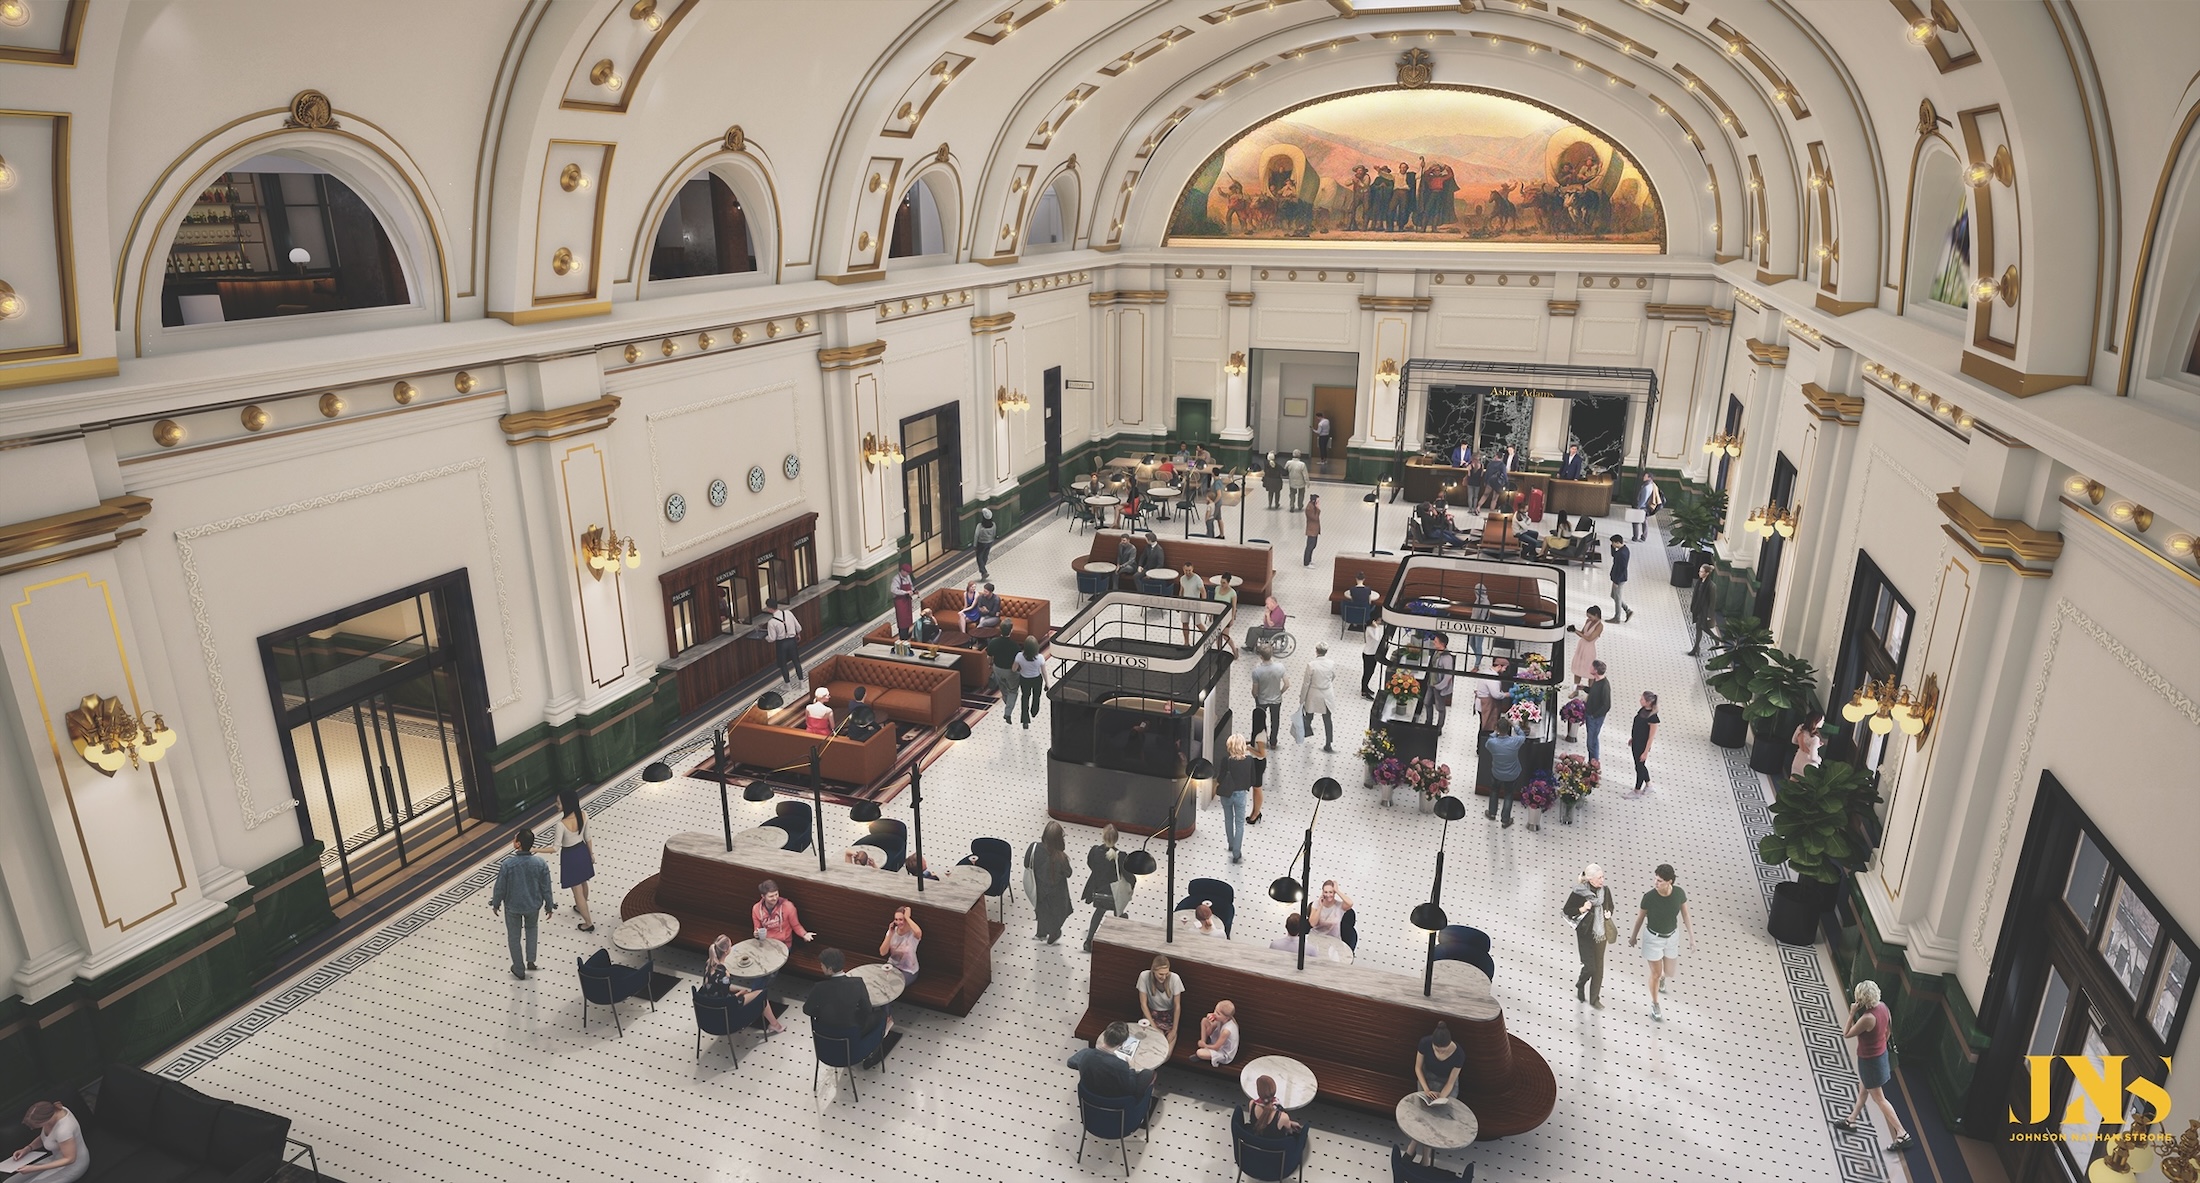 The historic Union Pacific train depot is being adaptively repurposed for the new Asher Adams Hotel, which will include a stunning Grand Hall (pictured).  Photo courtesy of Athens Group